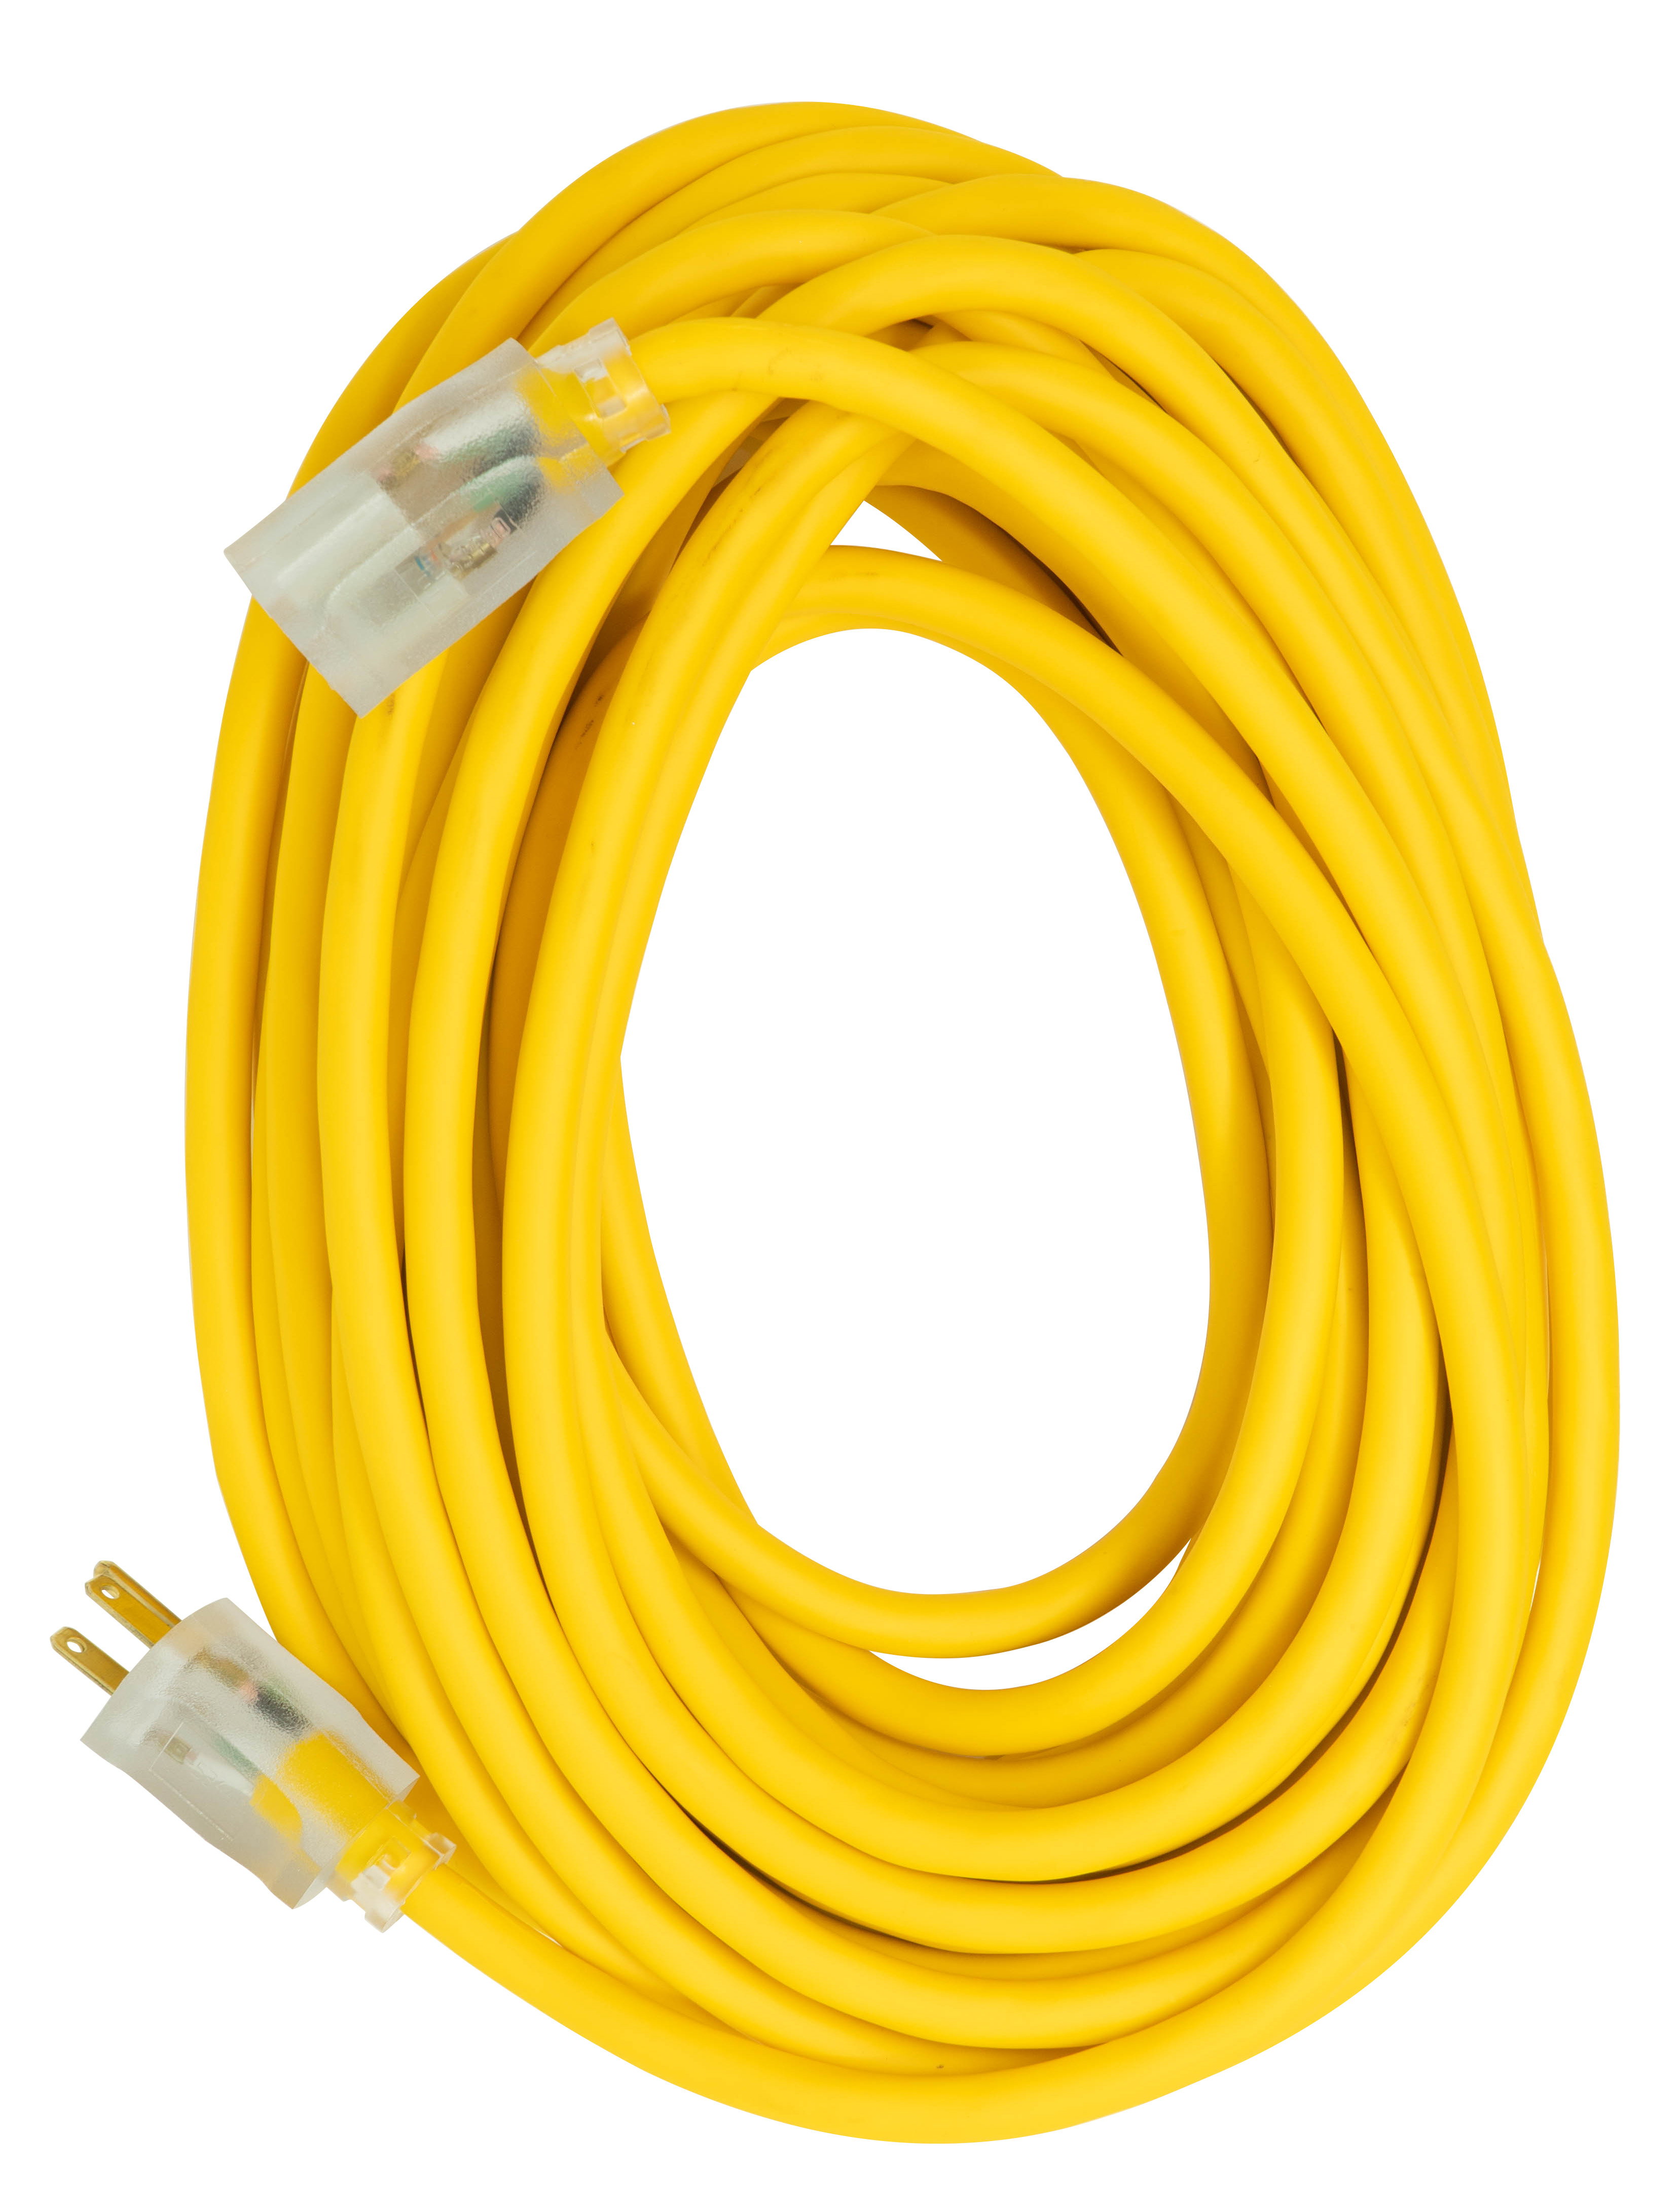 025880206 - 50' 12/3 SJTW Lighted CO - Cables & Cords